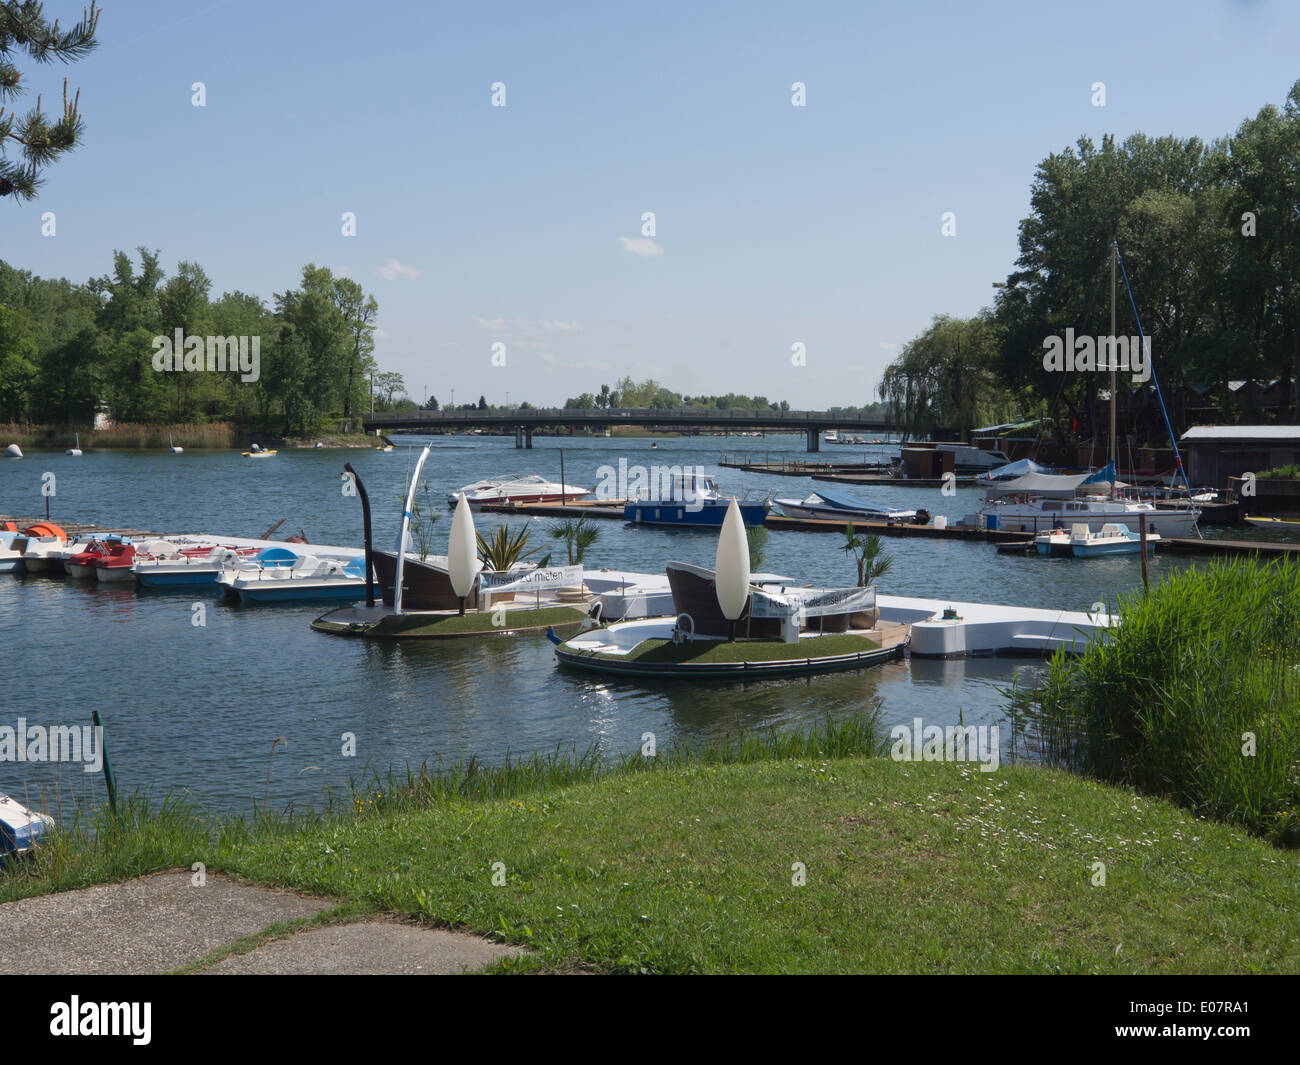 Alte Donau, or Old Danube,in Vienna Austria a lake for swimming, boating, relaxation and refreshments, boats for hire Stock Photo